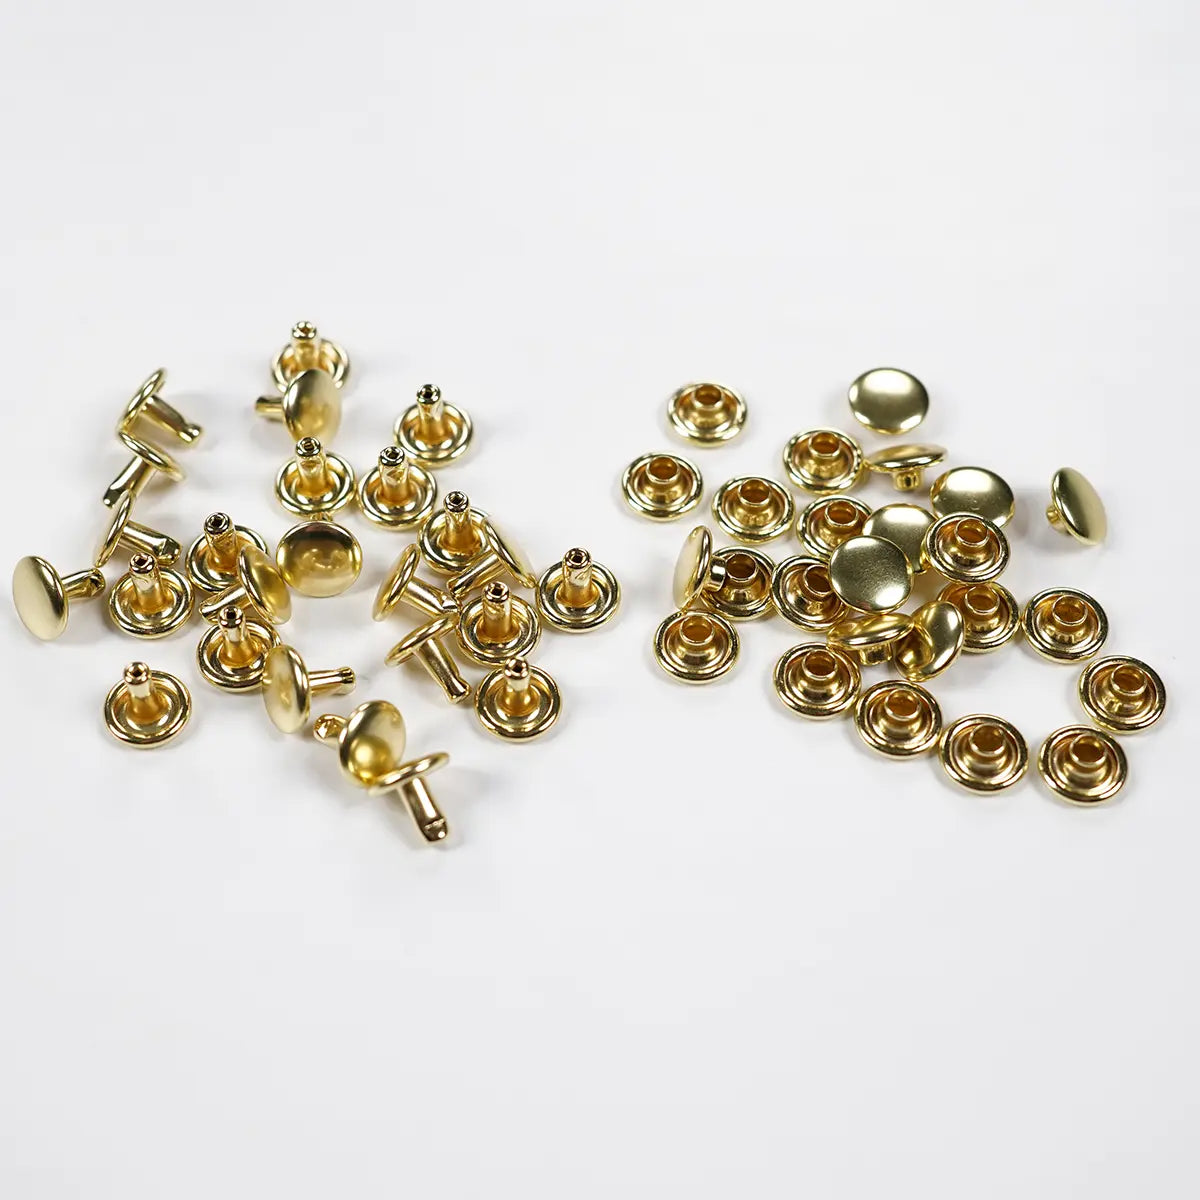 9.2mm x 7.9mm Solid Brass Double Cap Rivets 25 Pack